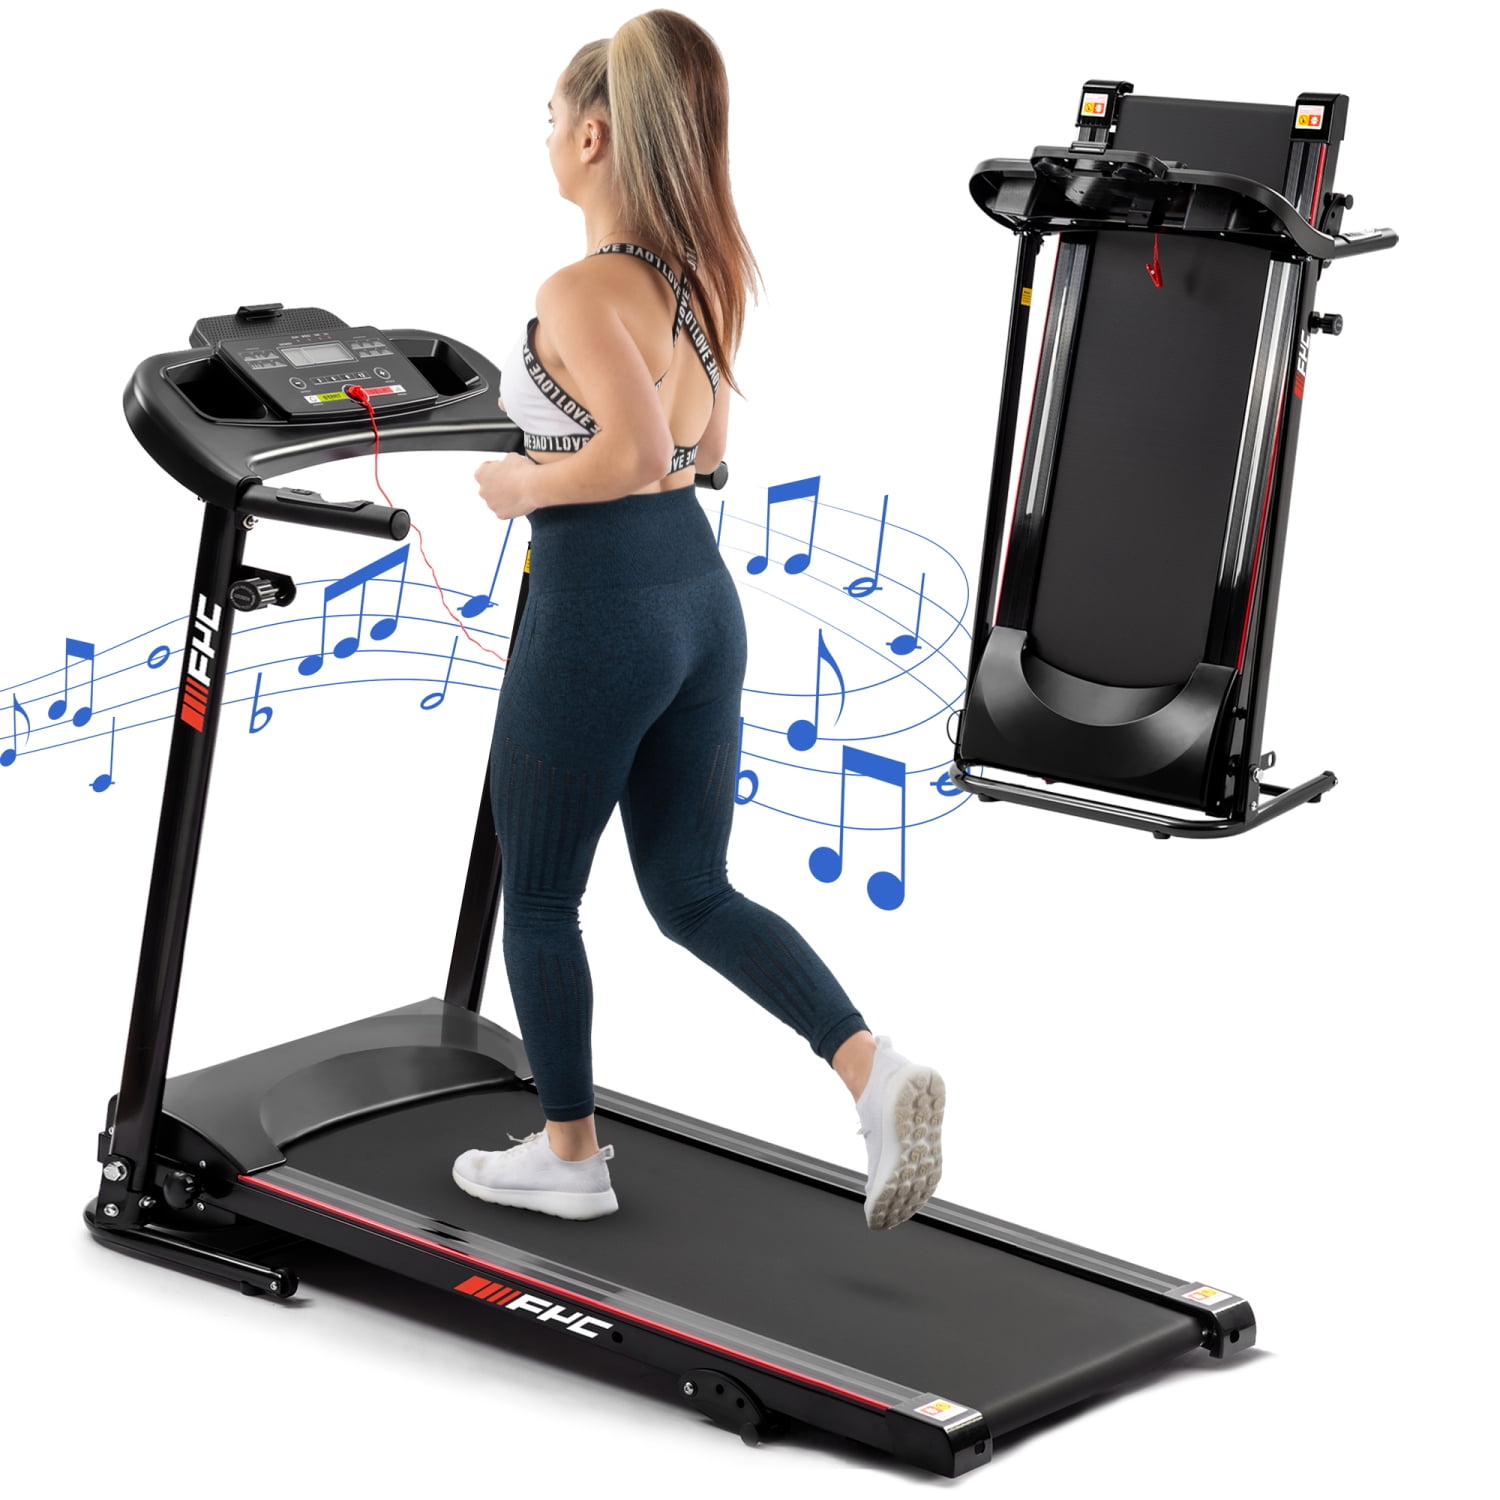 Avory Treadmills for Home 300 lbs Weight Capacity Foldable Electric Treadmill Gym Folding Running Machine Trainer Equipment 